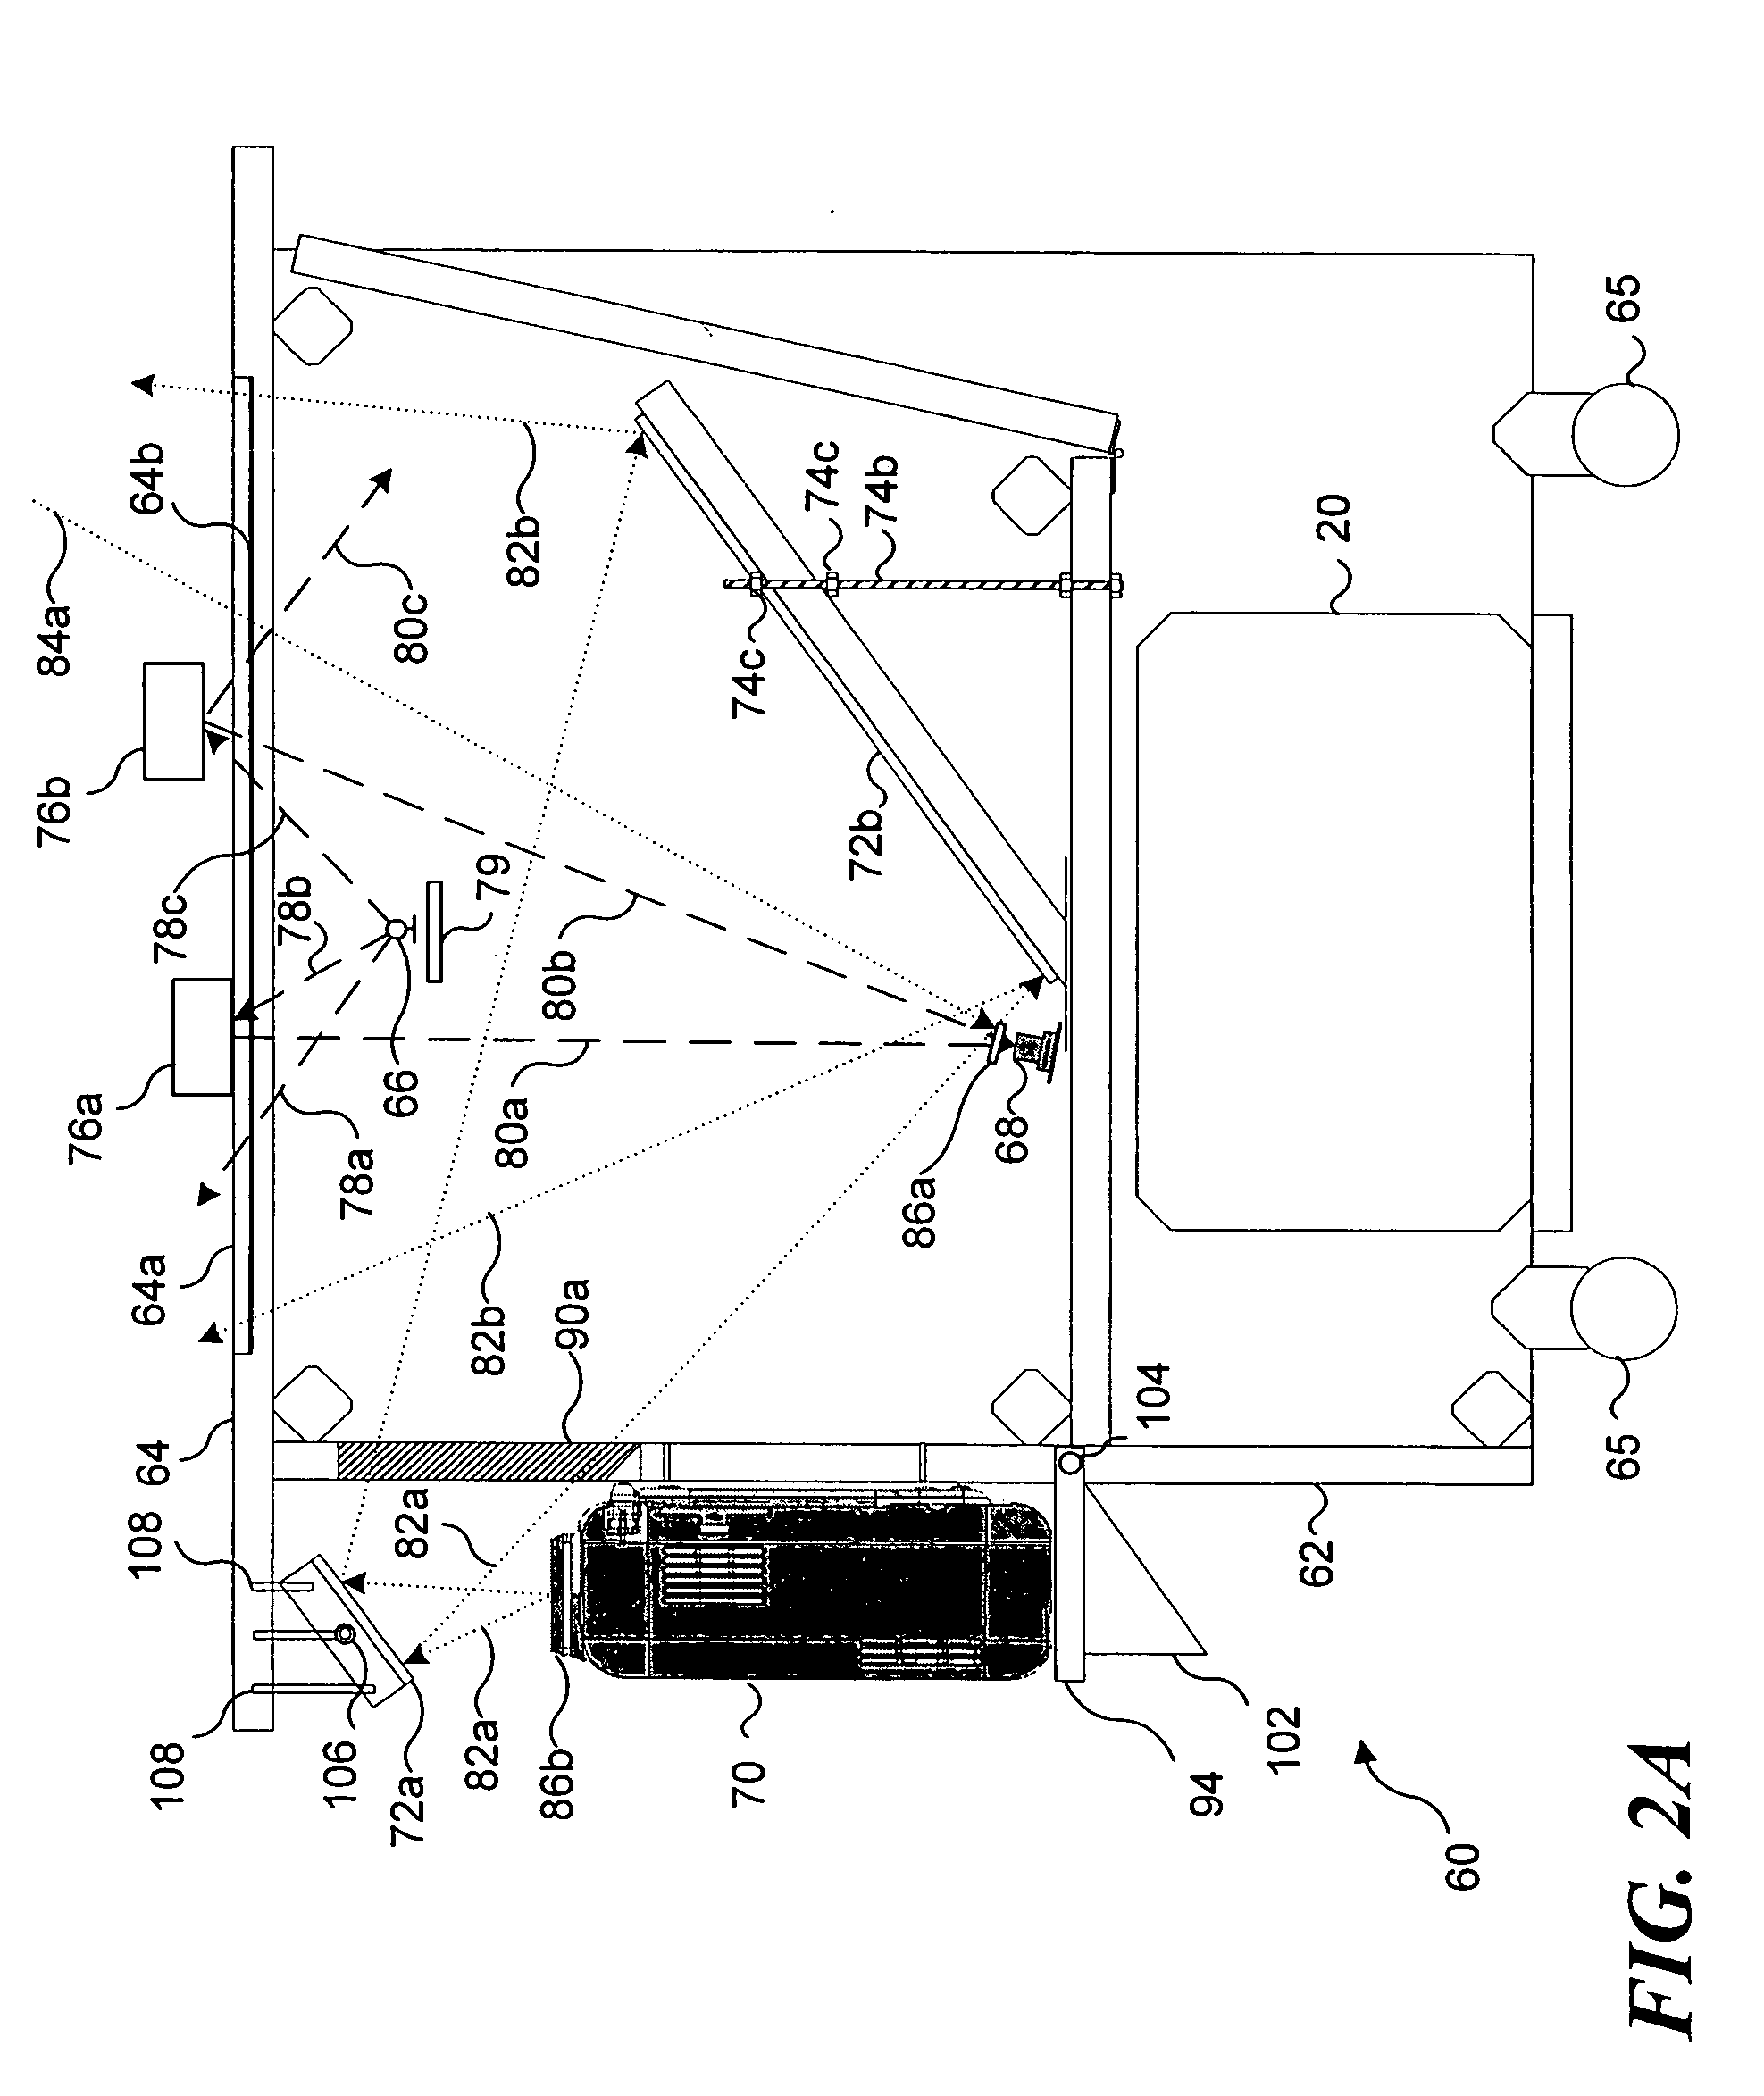 Selectable projector and imaging modes of display table